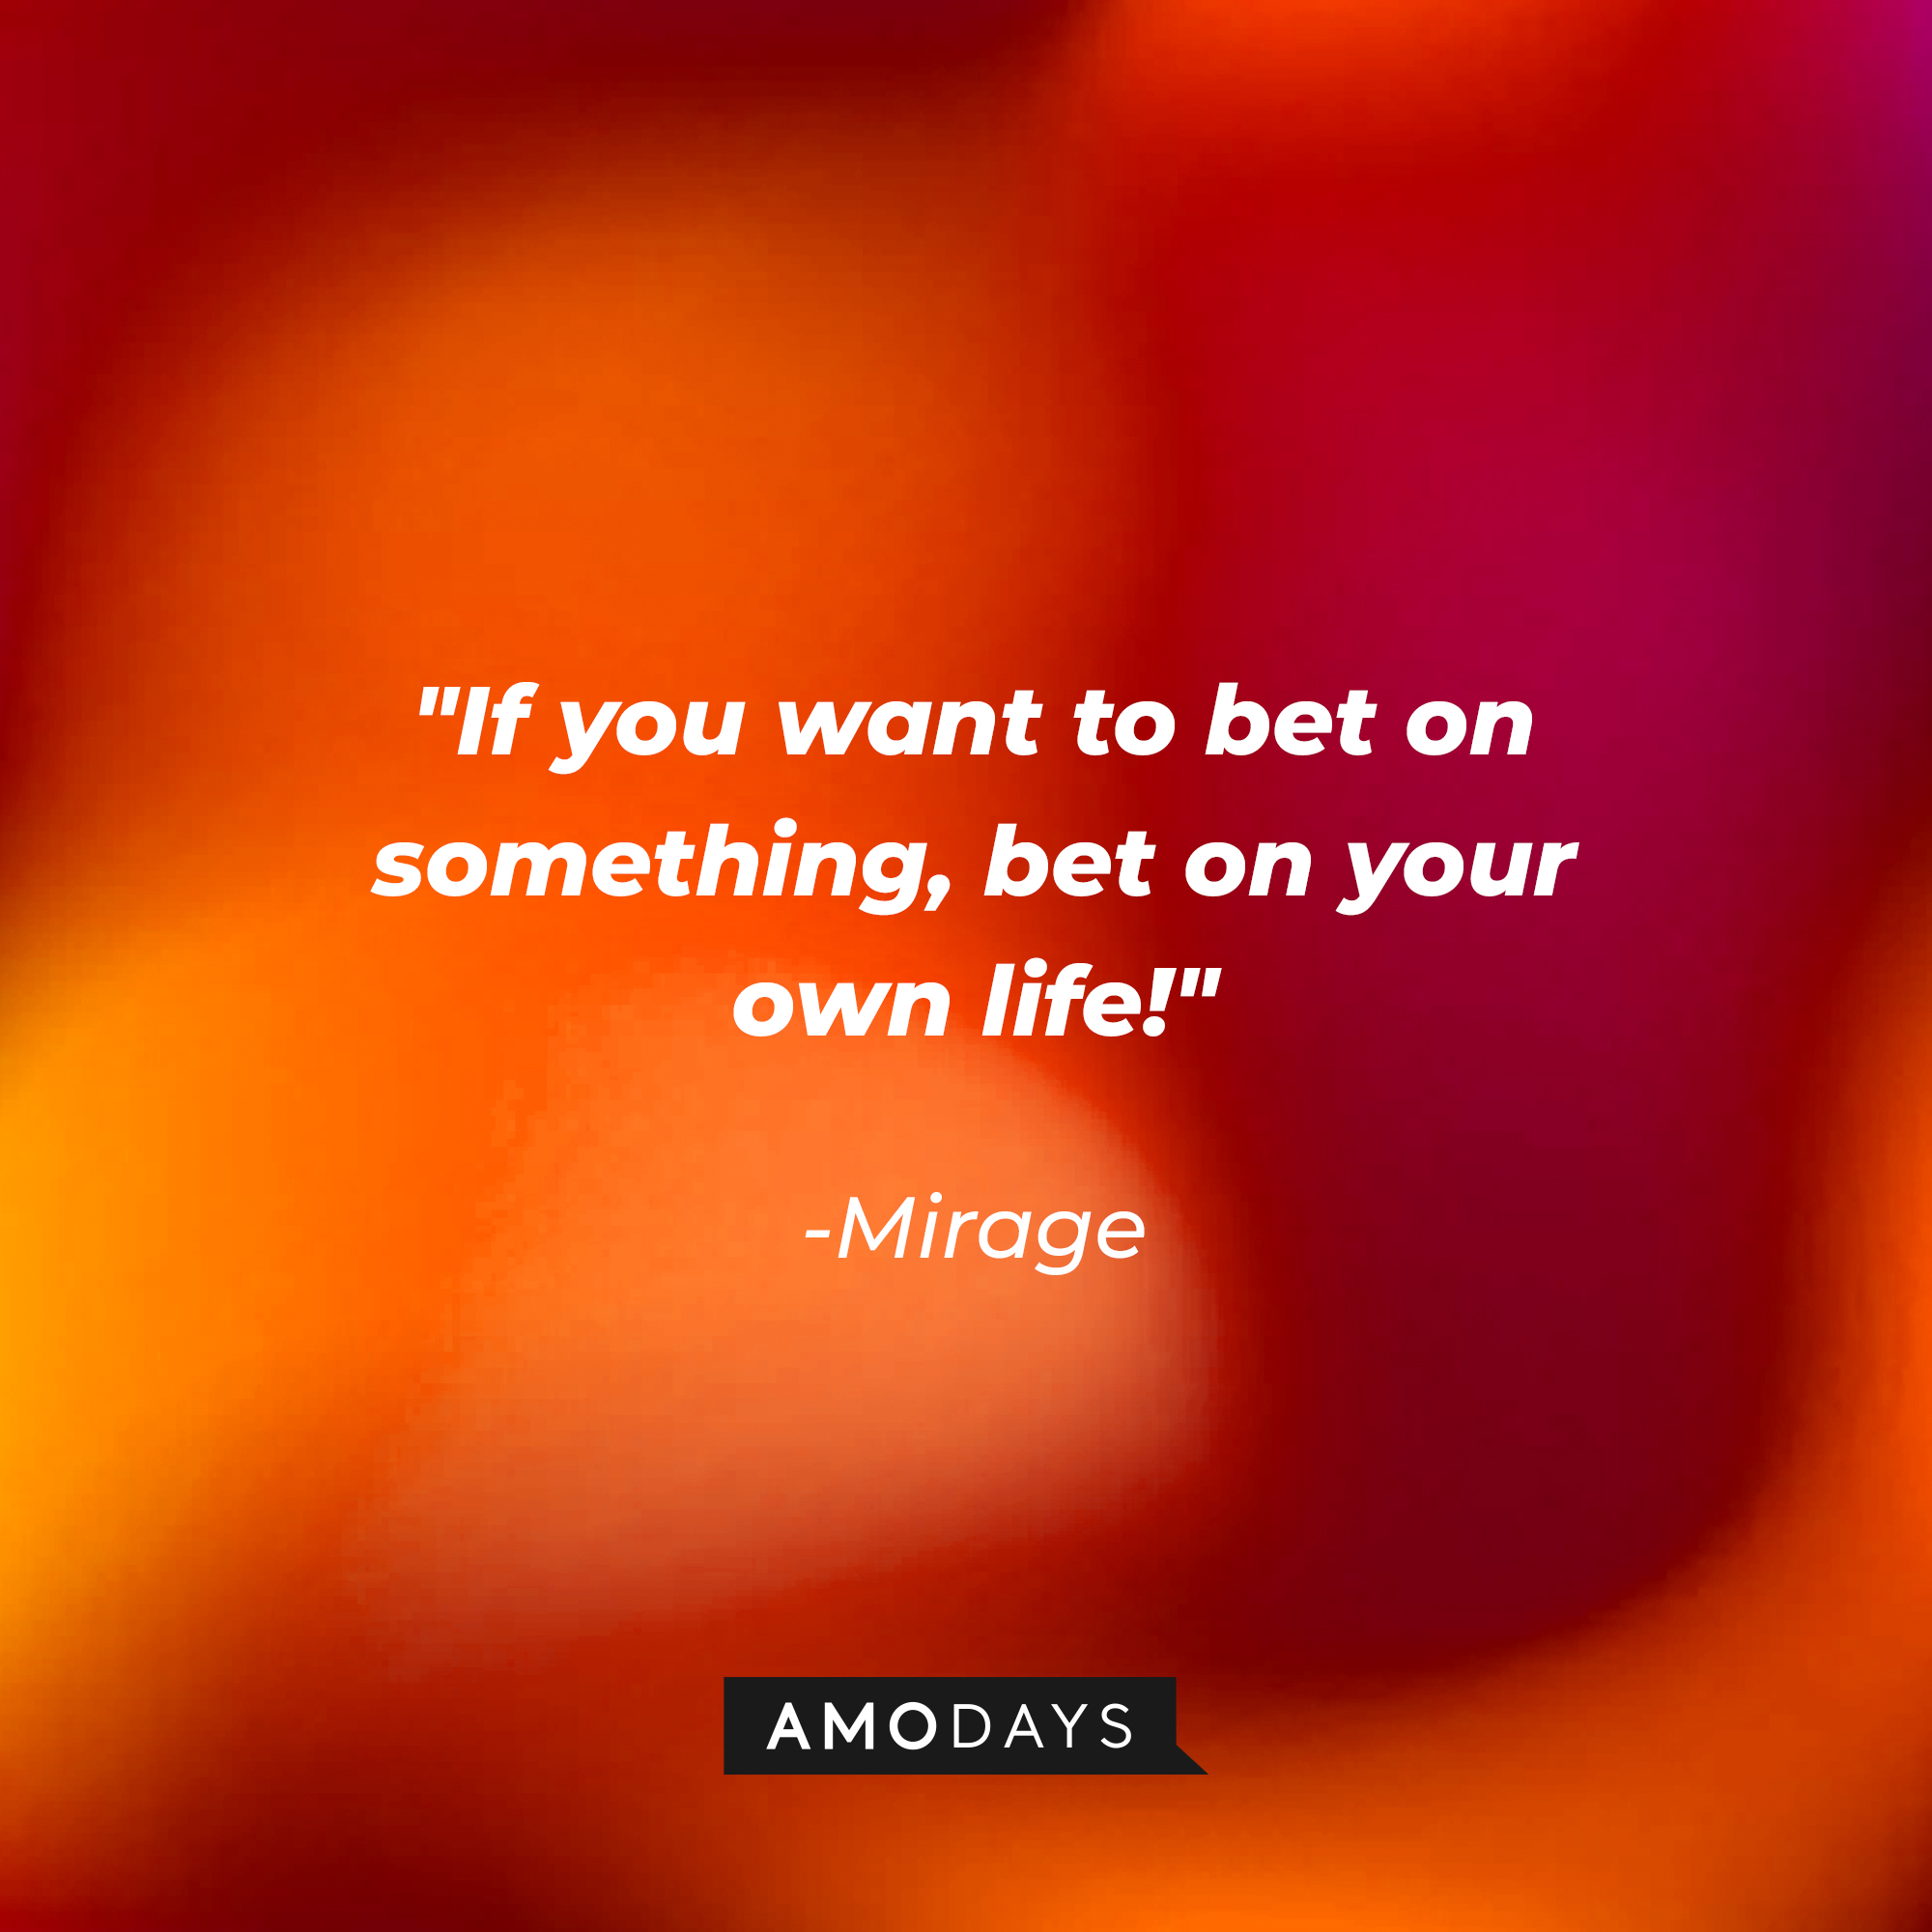 Mirage's quote: "If you want to bet on something, bet on your own life!" | Source: Amodays